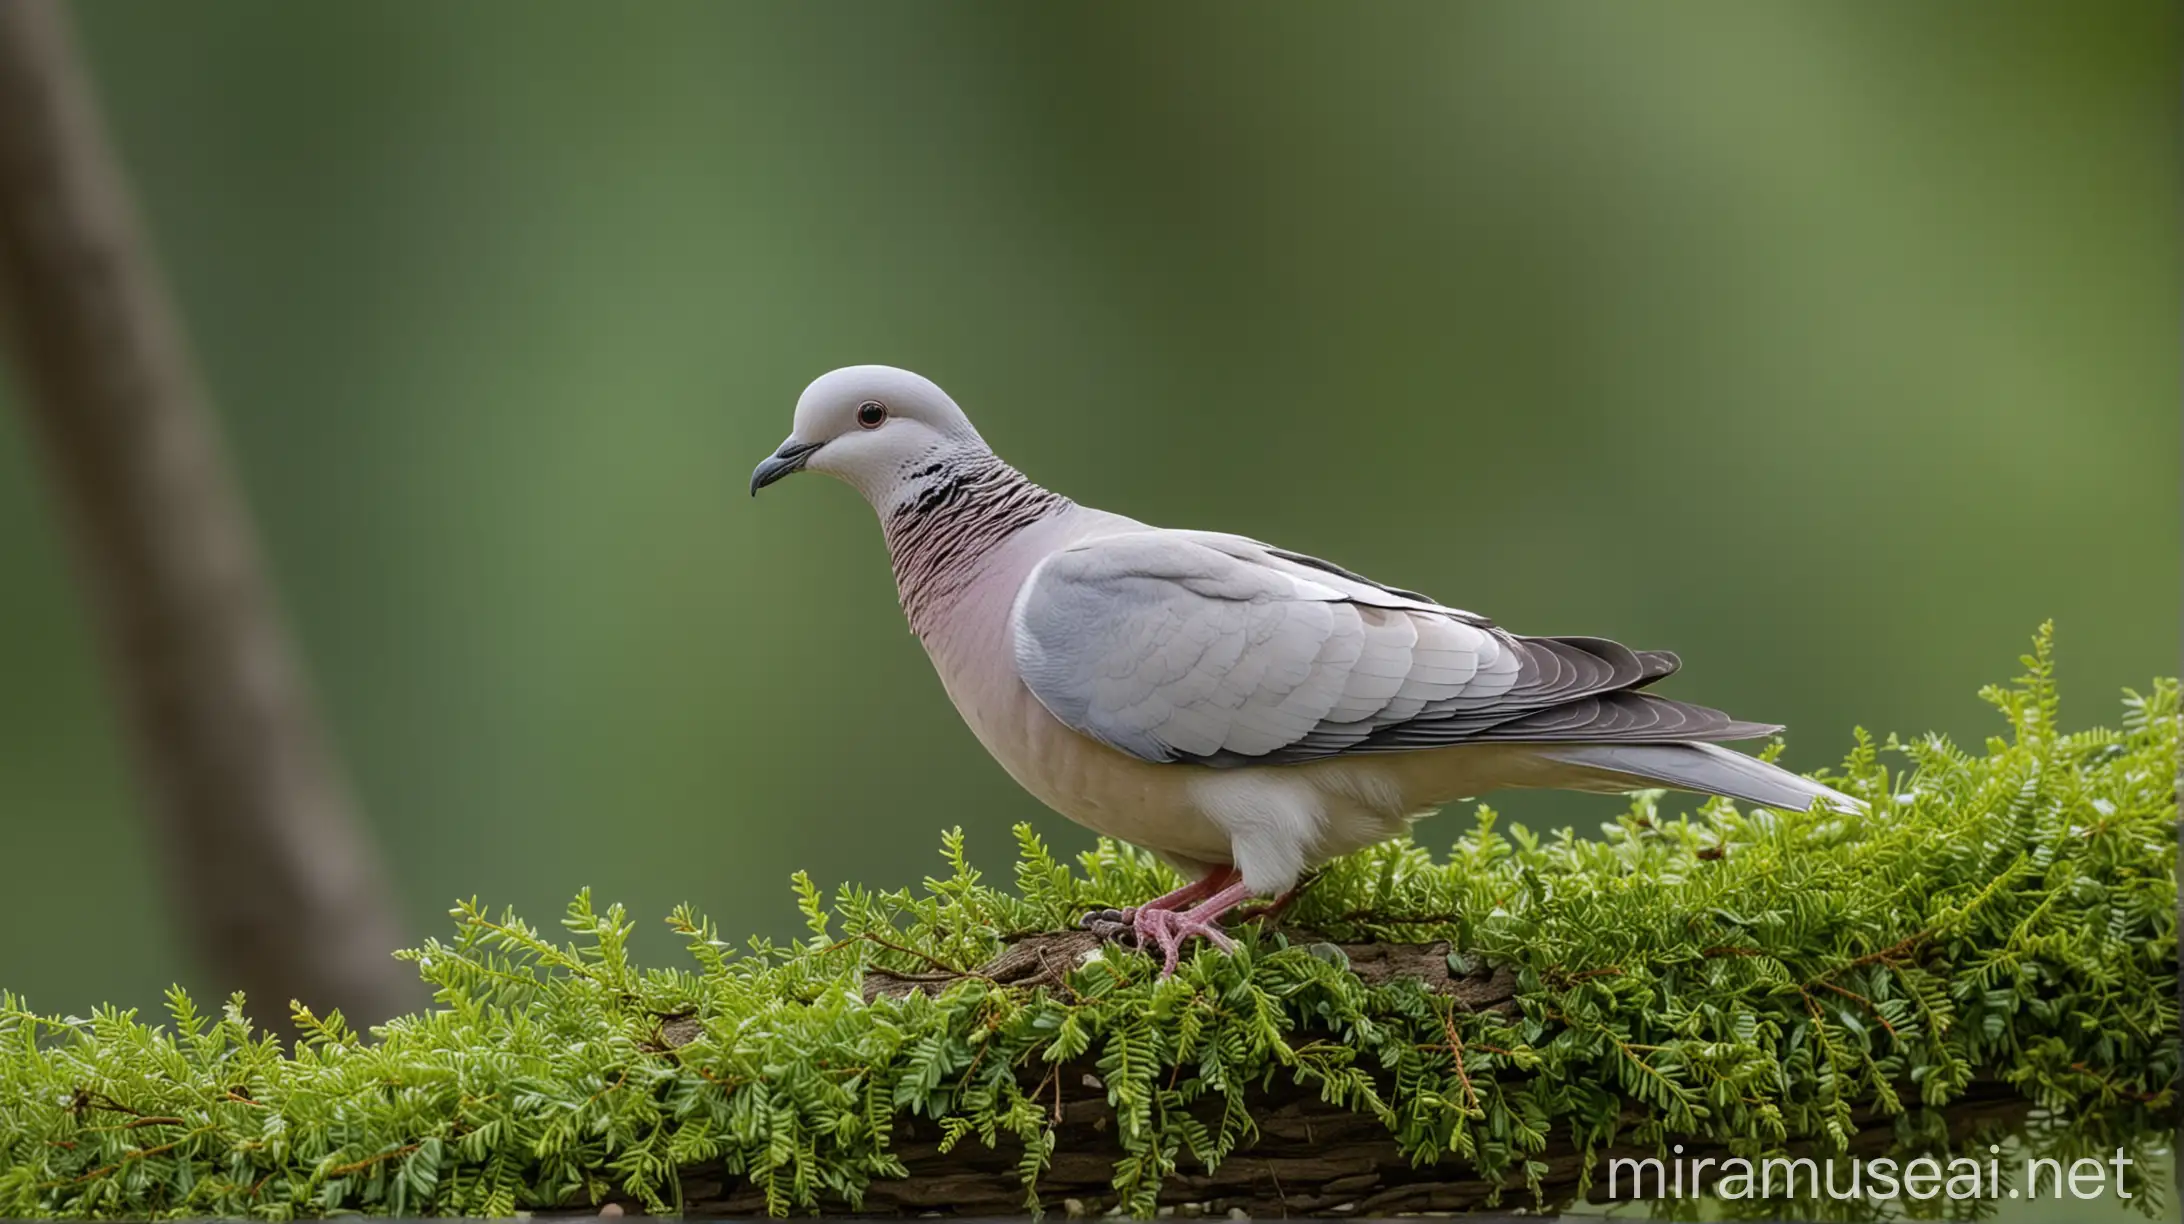 Striped Dove with Open Beak Perched on Green Wooden Tree